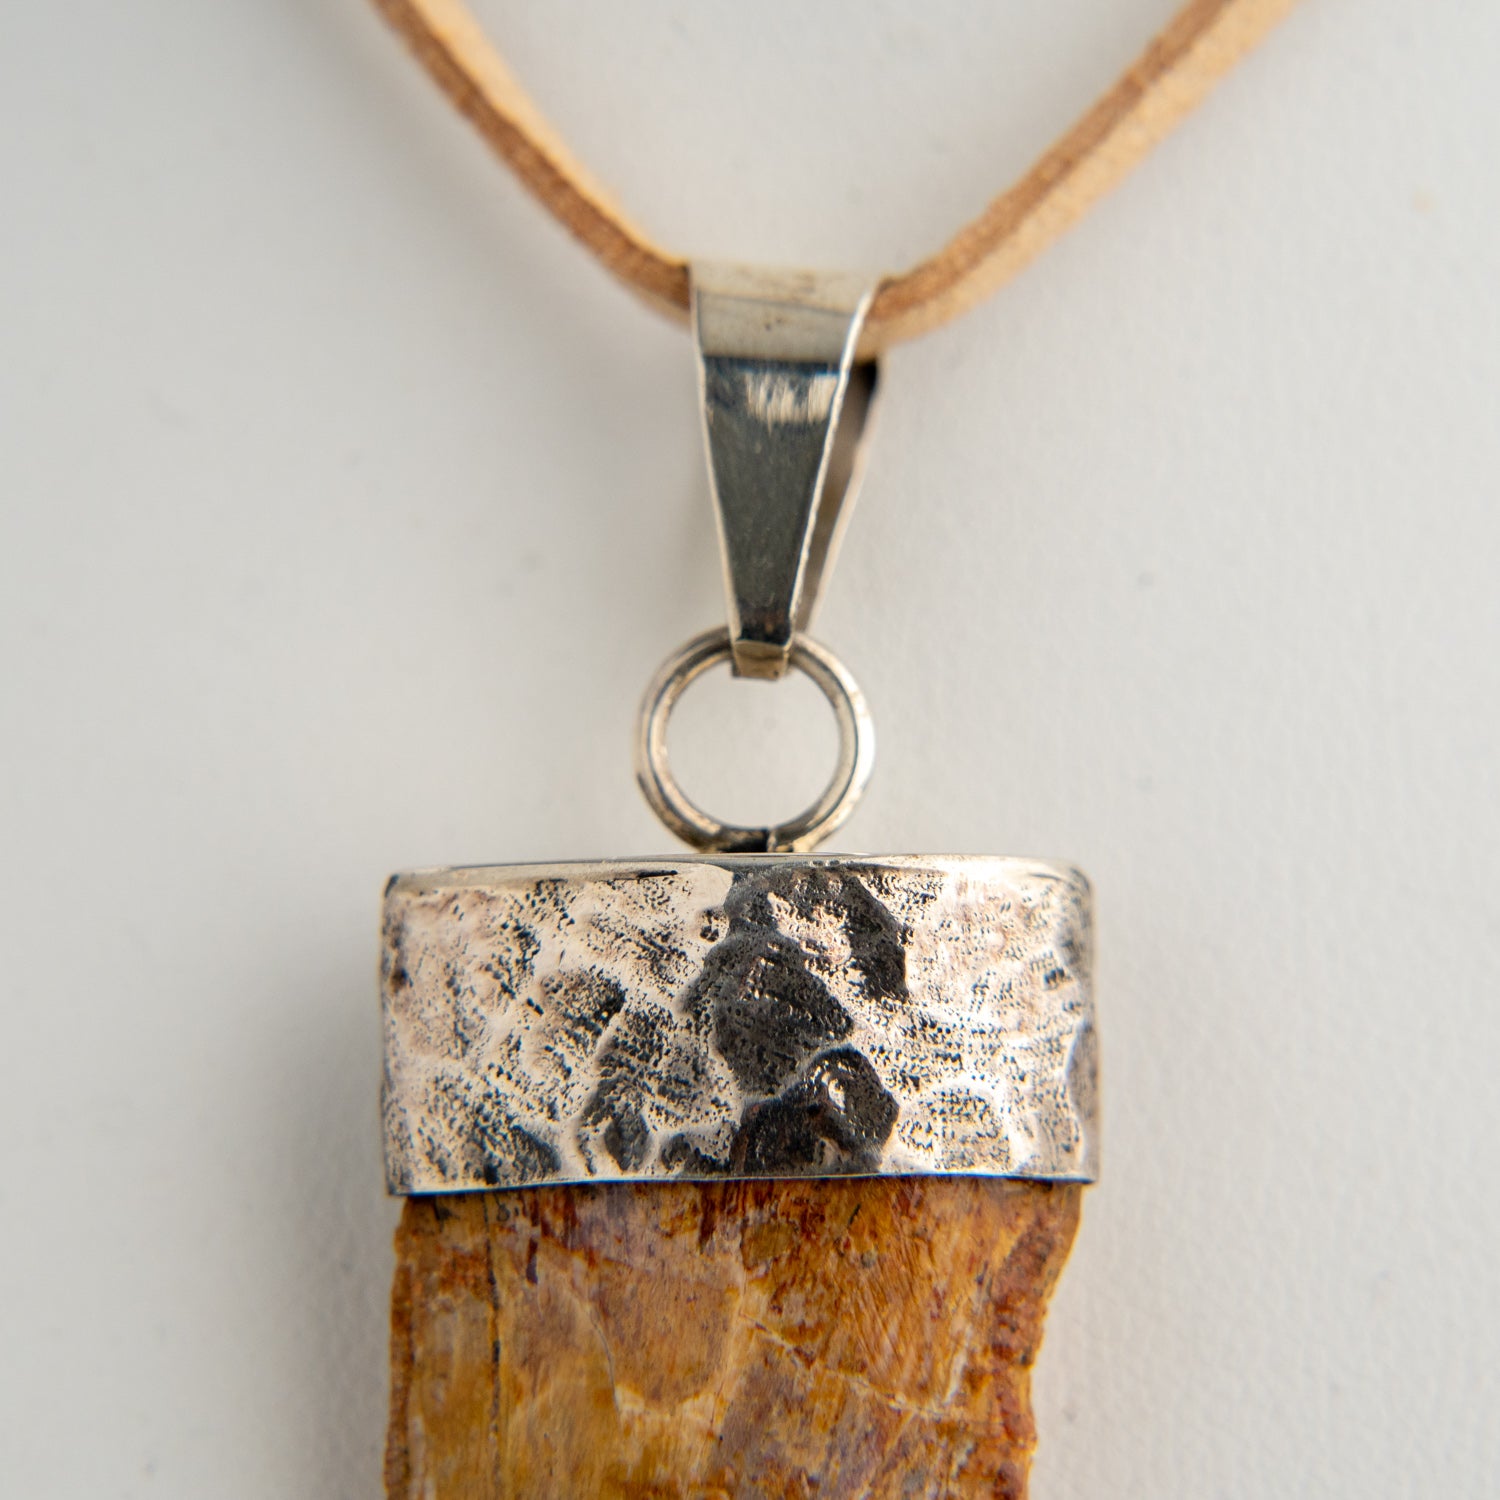 Genuine African Tyrannosaurus Rex Tooth Pendant on Leather Cord